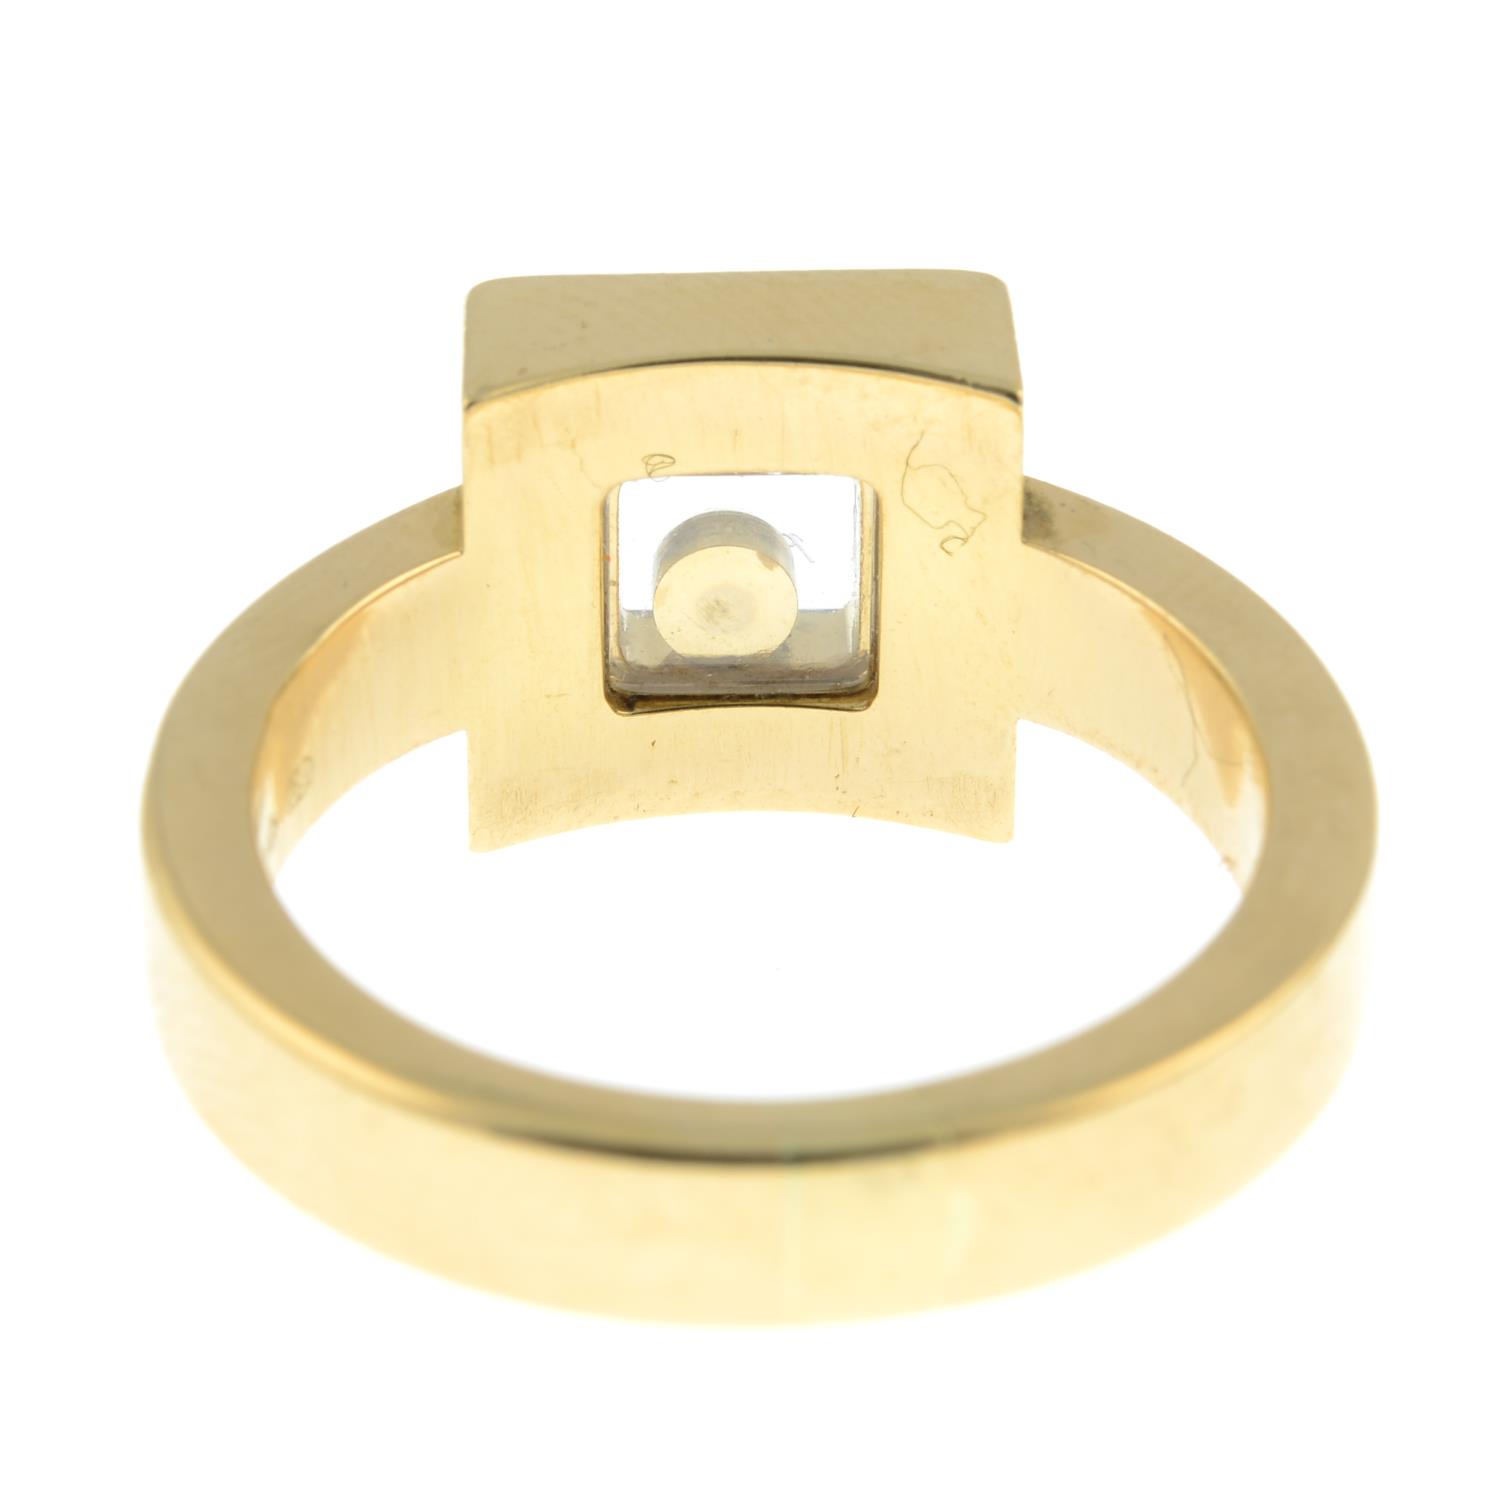 An 18ct gold brilliant-cut diamond square-shape 'Happy Diamonds' 'Icons' ring, by Chopard. - Image 5 of 6